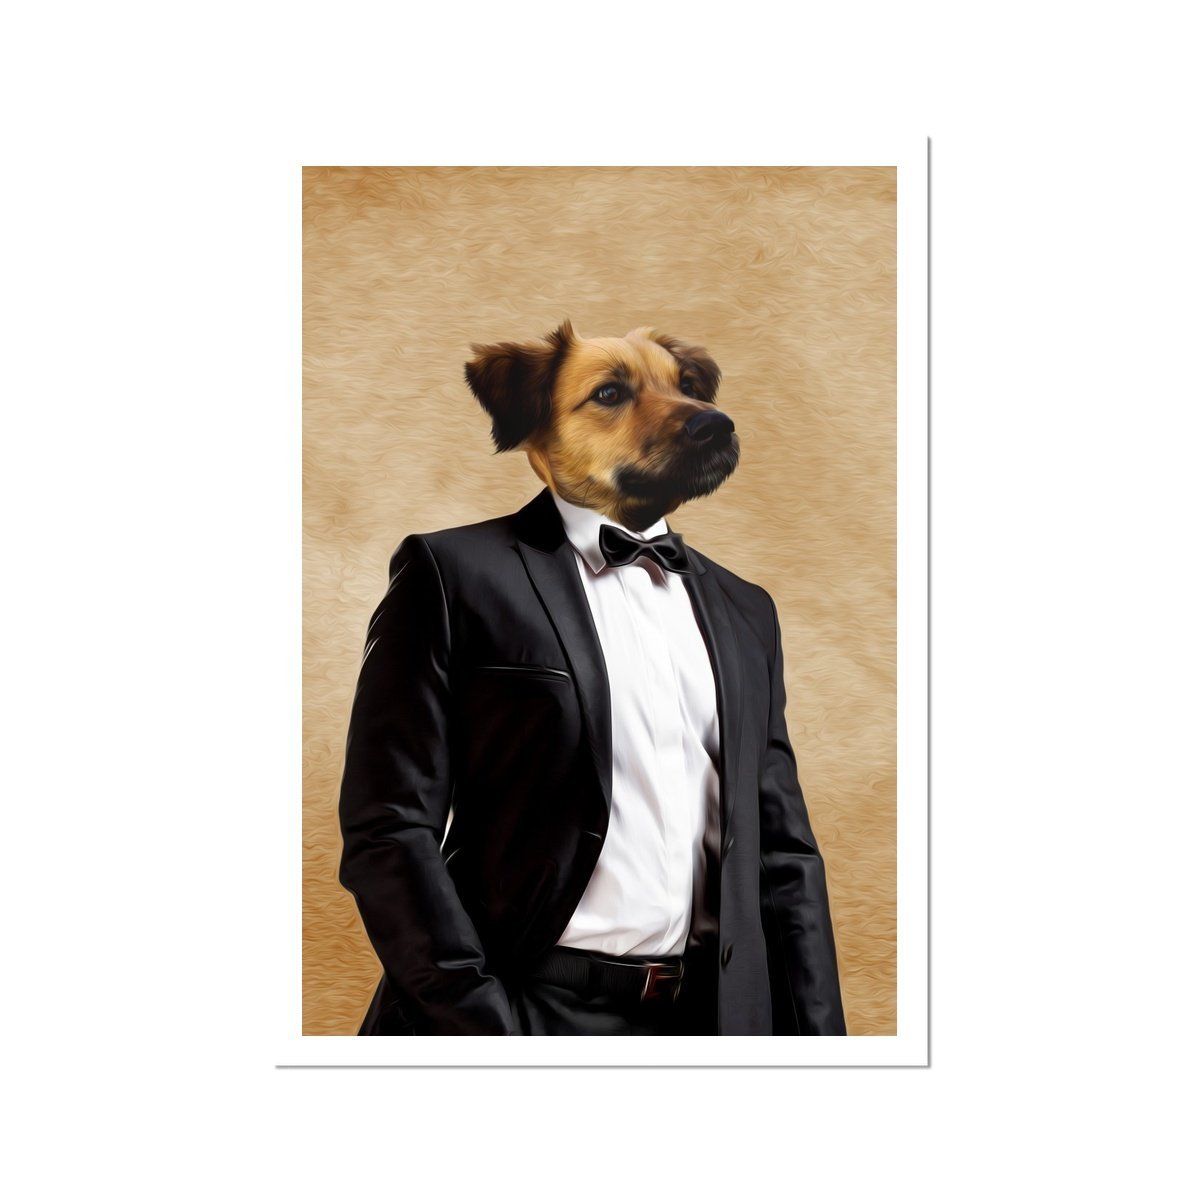 The Gentleman: Custom Pet Poster - Paw & Glory - #pet portraits# - #dog portraits# - #pet portraits uk#Paw & Glory, paw and glory, painting of dog as royalty etsy animal portraits, pet general portraits pet portraits queen custom pet portrait canvas, dog general portrait pet portraits